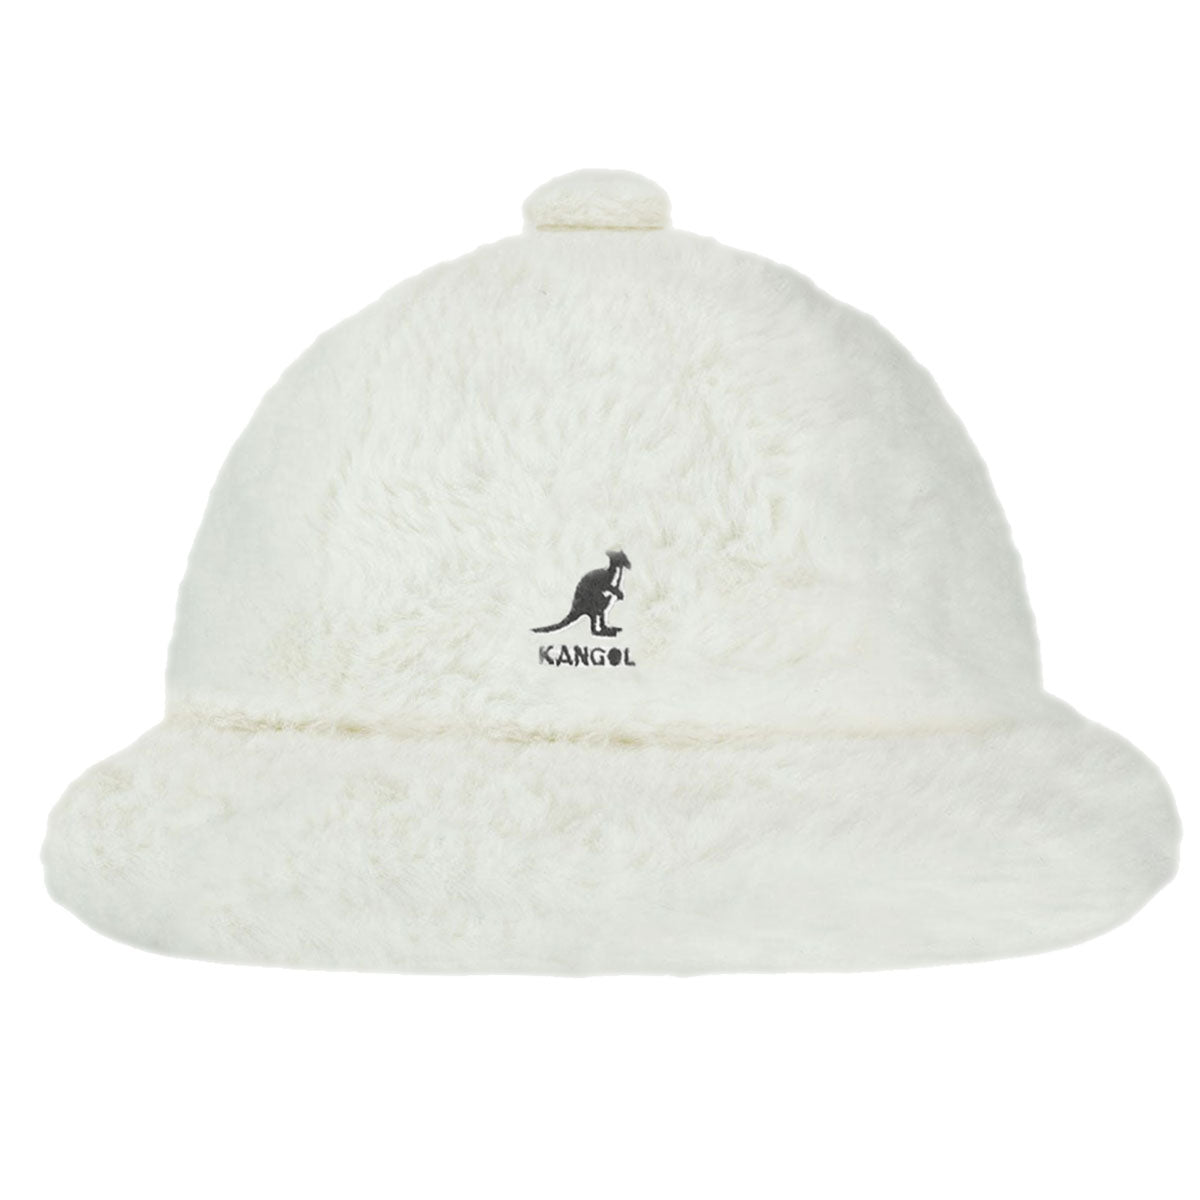 FAUX FUR CASUAL – The Official Kangol® Store